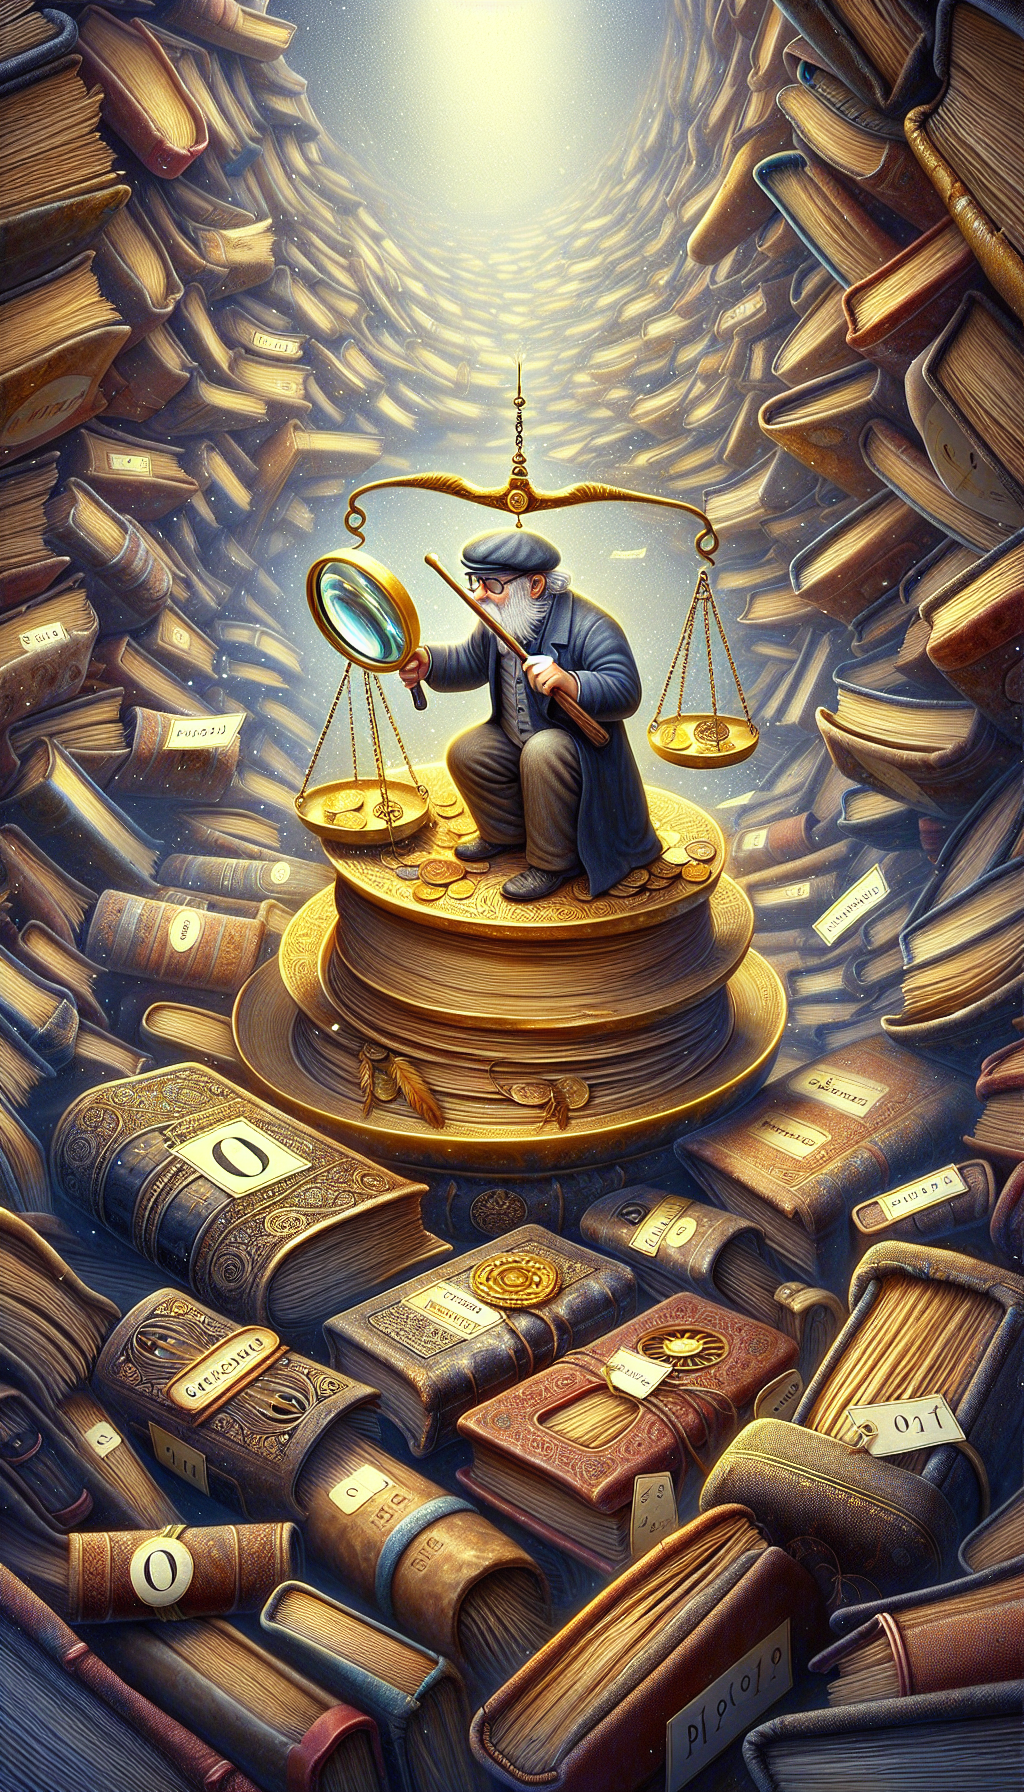 In the whimsical illustration, an enthusiastic novice antiquarian, equipped with a magnifying glass, peeks over a towering stack of dusty, leather-bound tomes, with visible price tags reading "0" amidst swirls of paper and golden letters. An antique scale balances a feather and a coin, symbolizing the free evaluation of the books' worth, beneath a banner reading "Beginner's Guide."